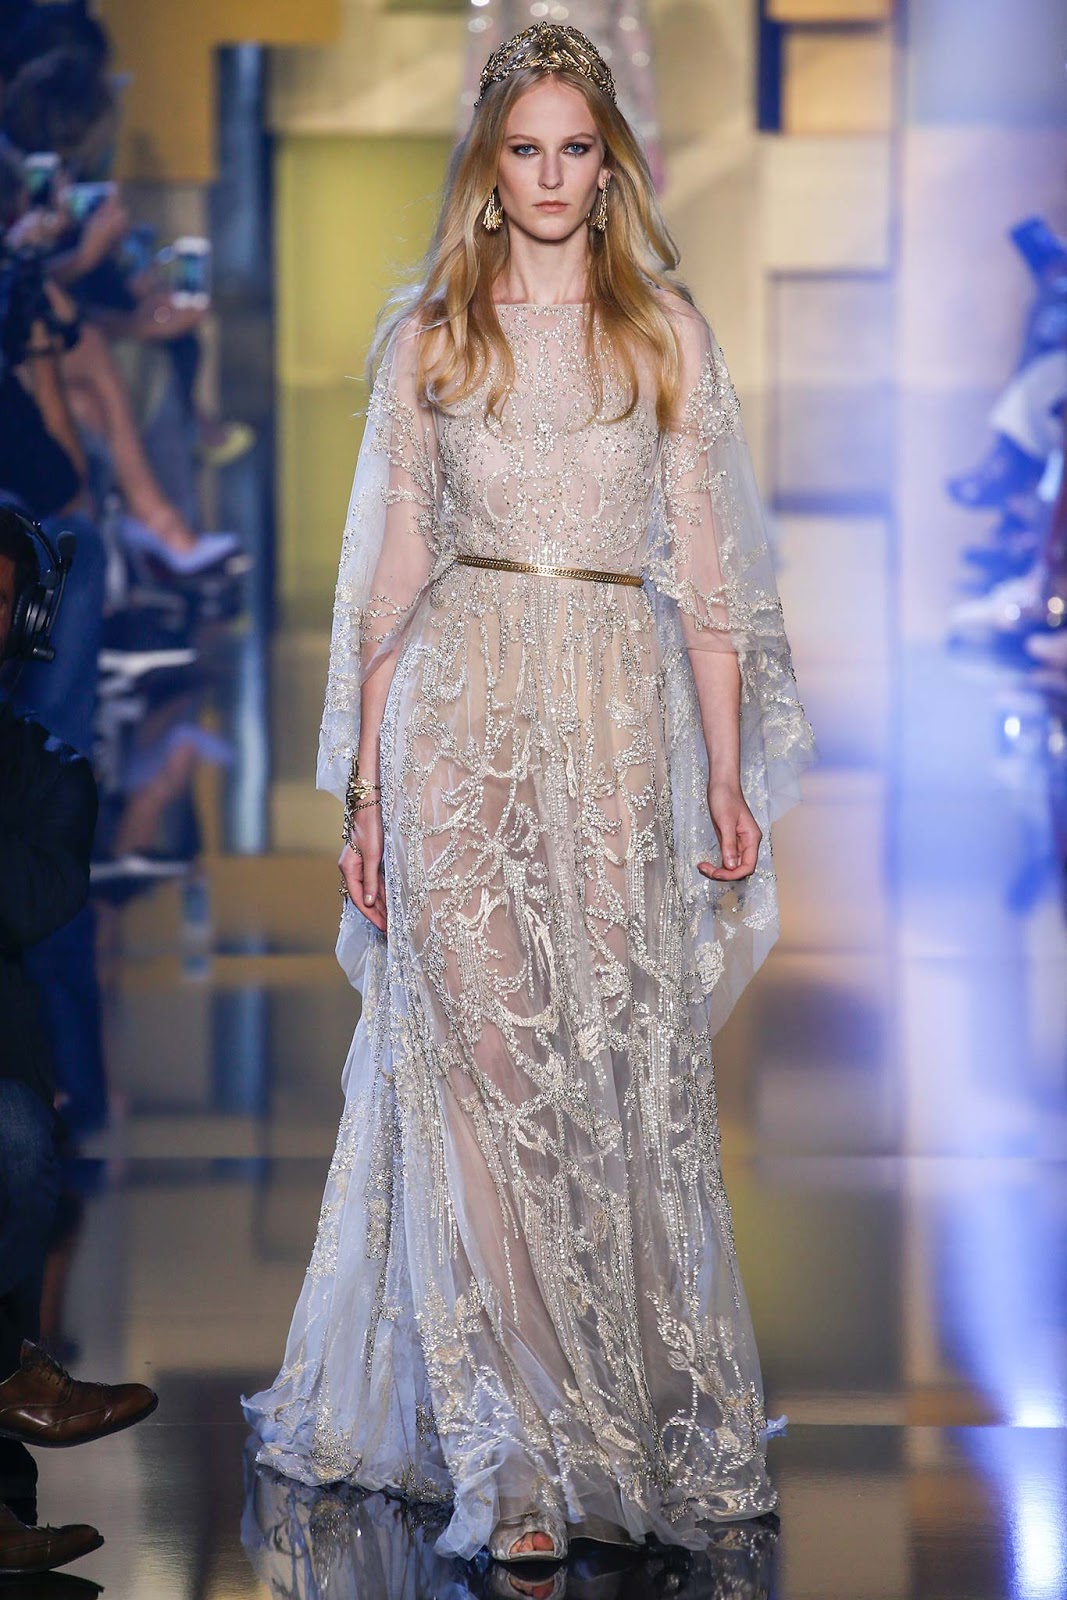 Elie Saab: Haute Couture July 13, 2015 | ZsaZsa Bellagio - Like No Other